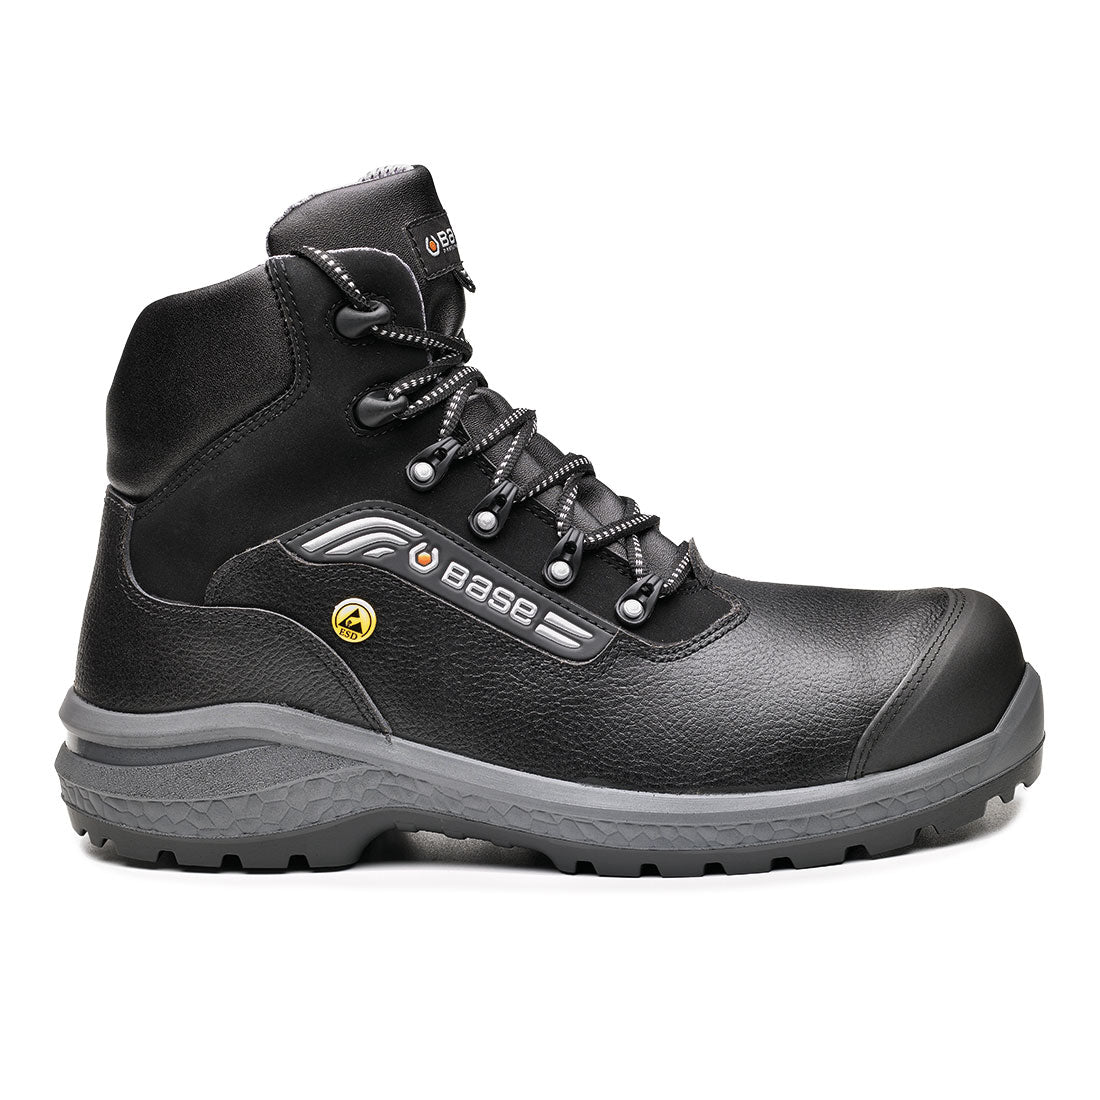 Base Be-Easy Top Safety Boots S3 ESD SRC